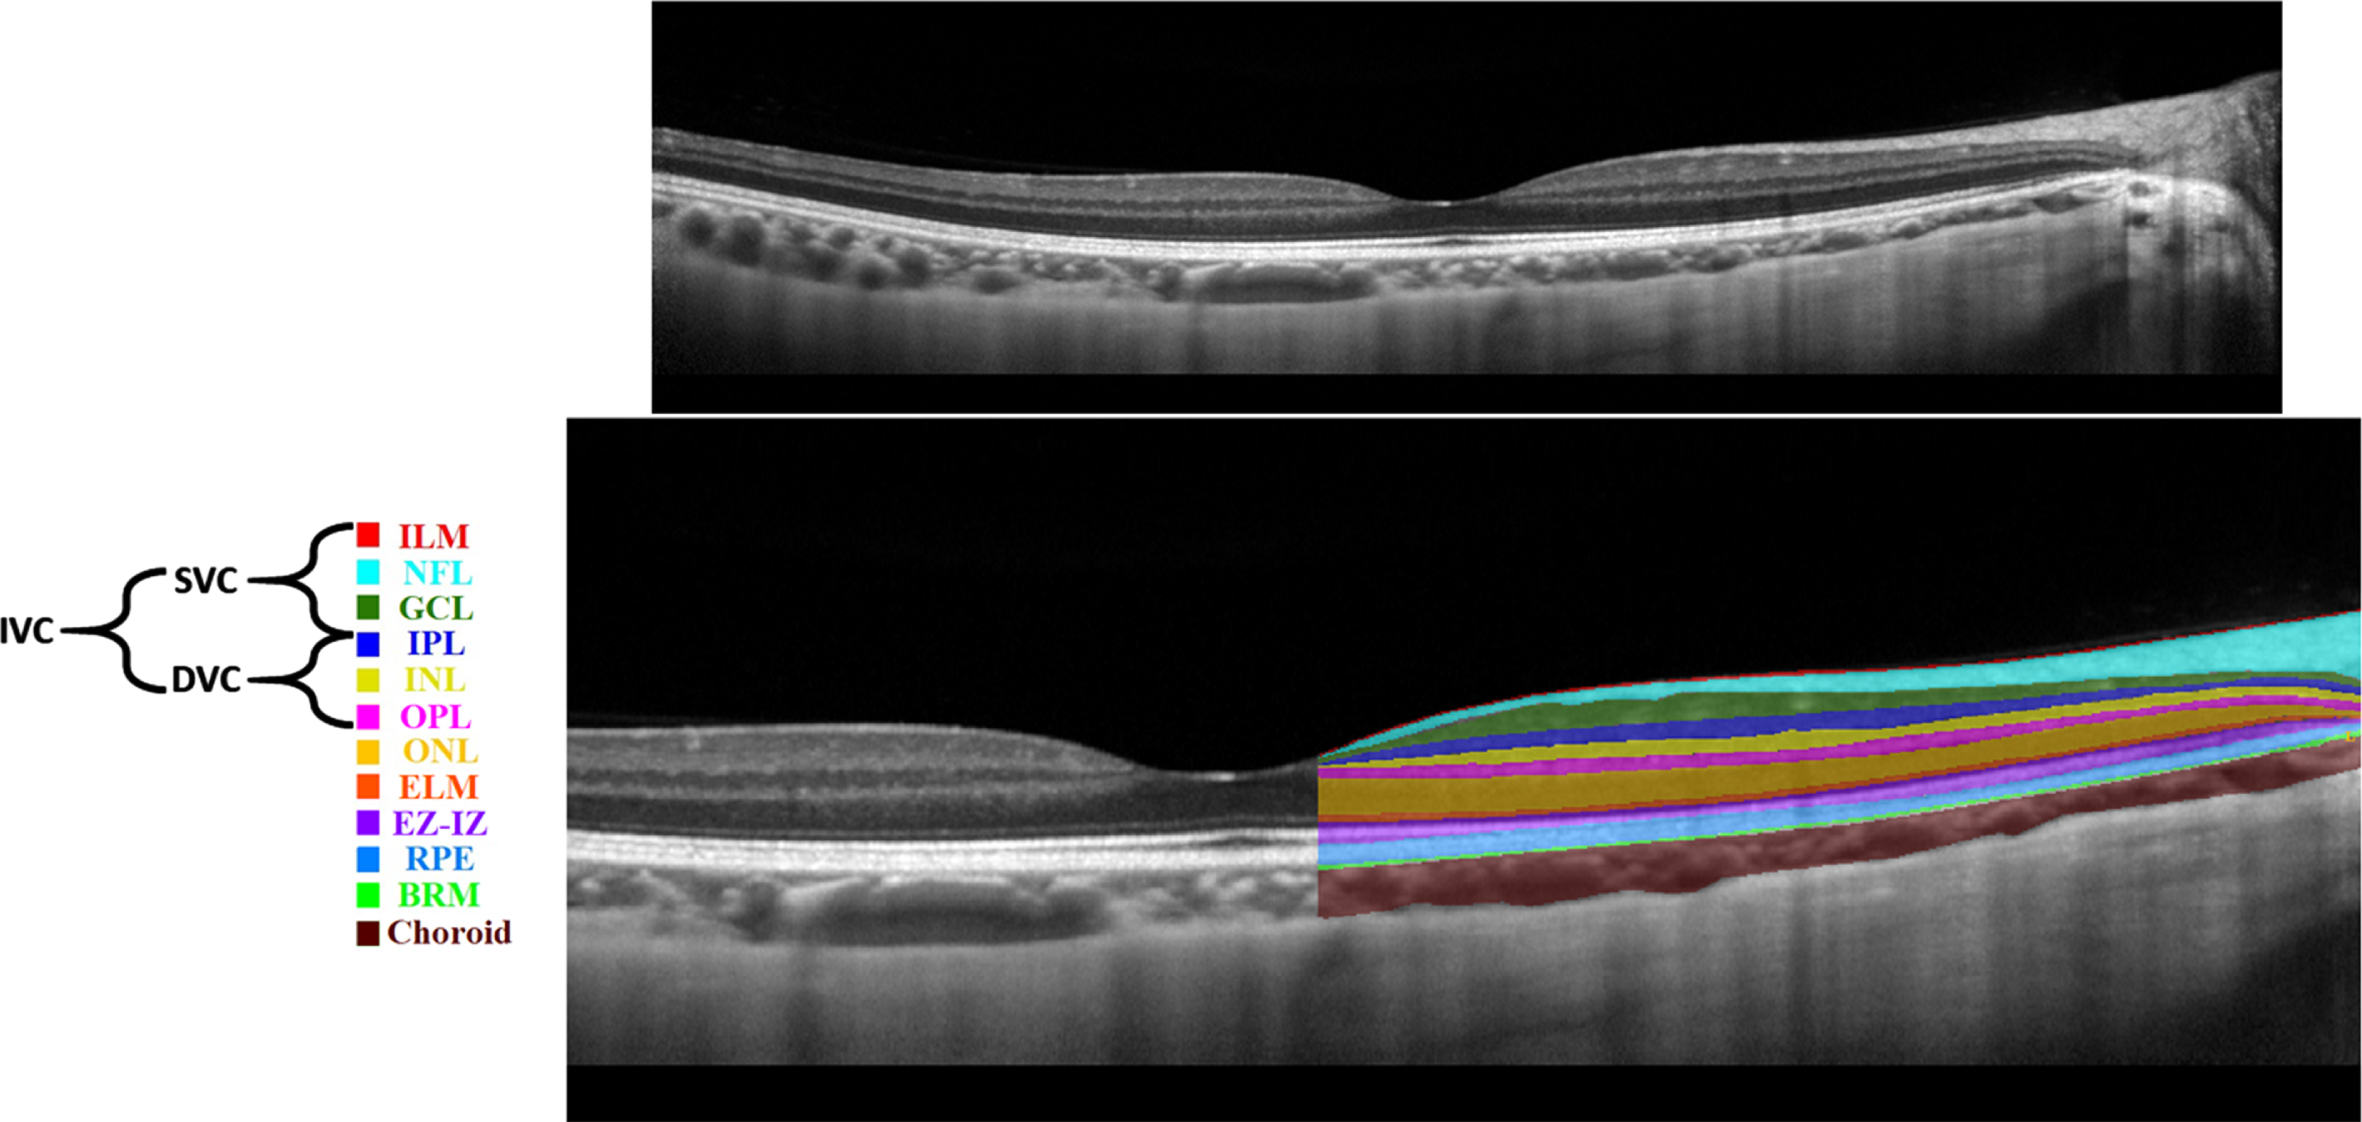 Retinal layers in a spectral domain optical coherence tomography b-scan image: unlabeled (top), labelled (bottom).